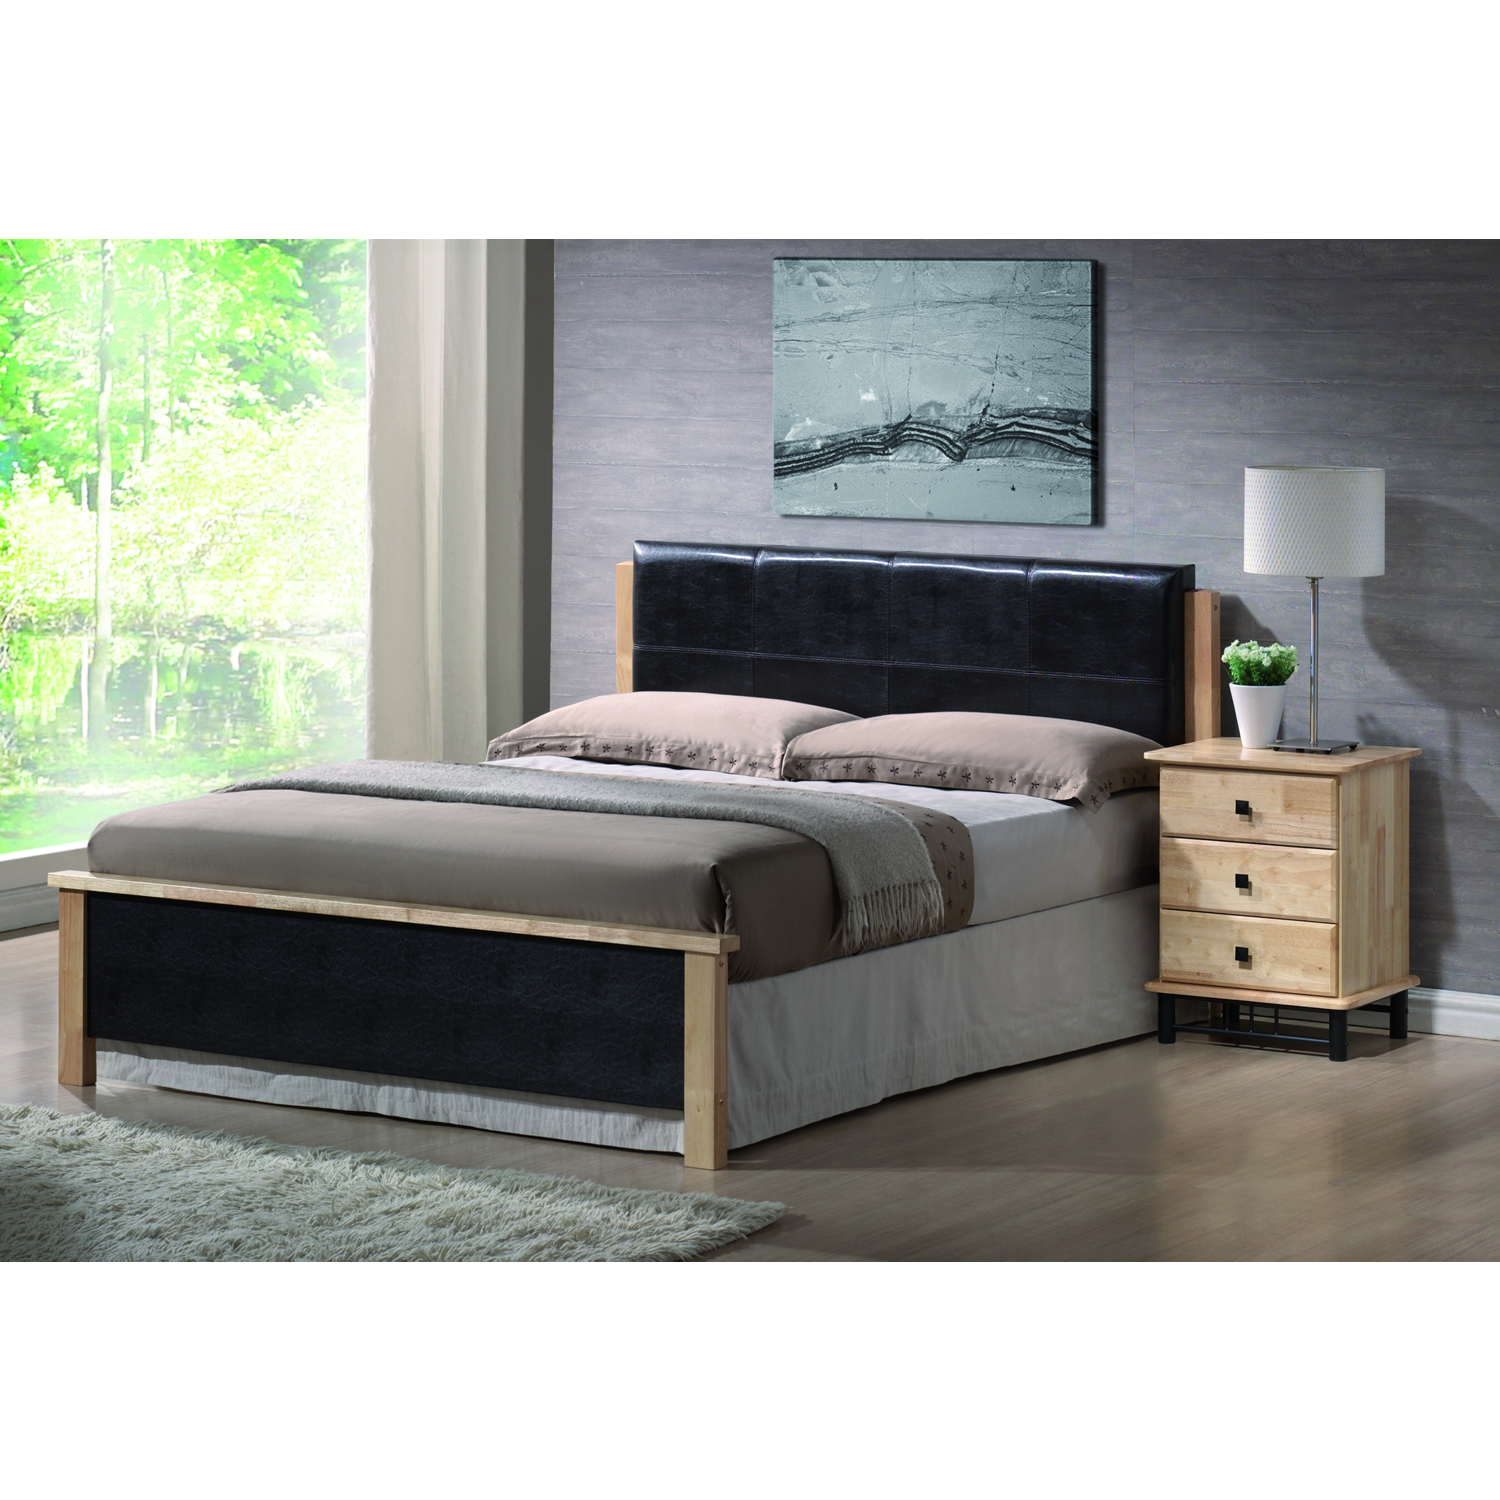 Image of Ambers International Carina Wooden and Faux Leather Bed Frame